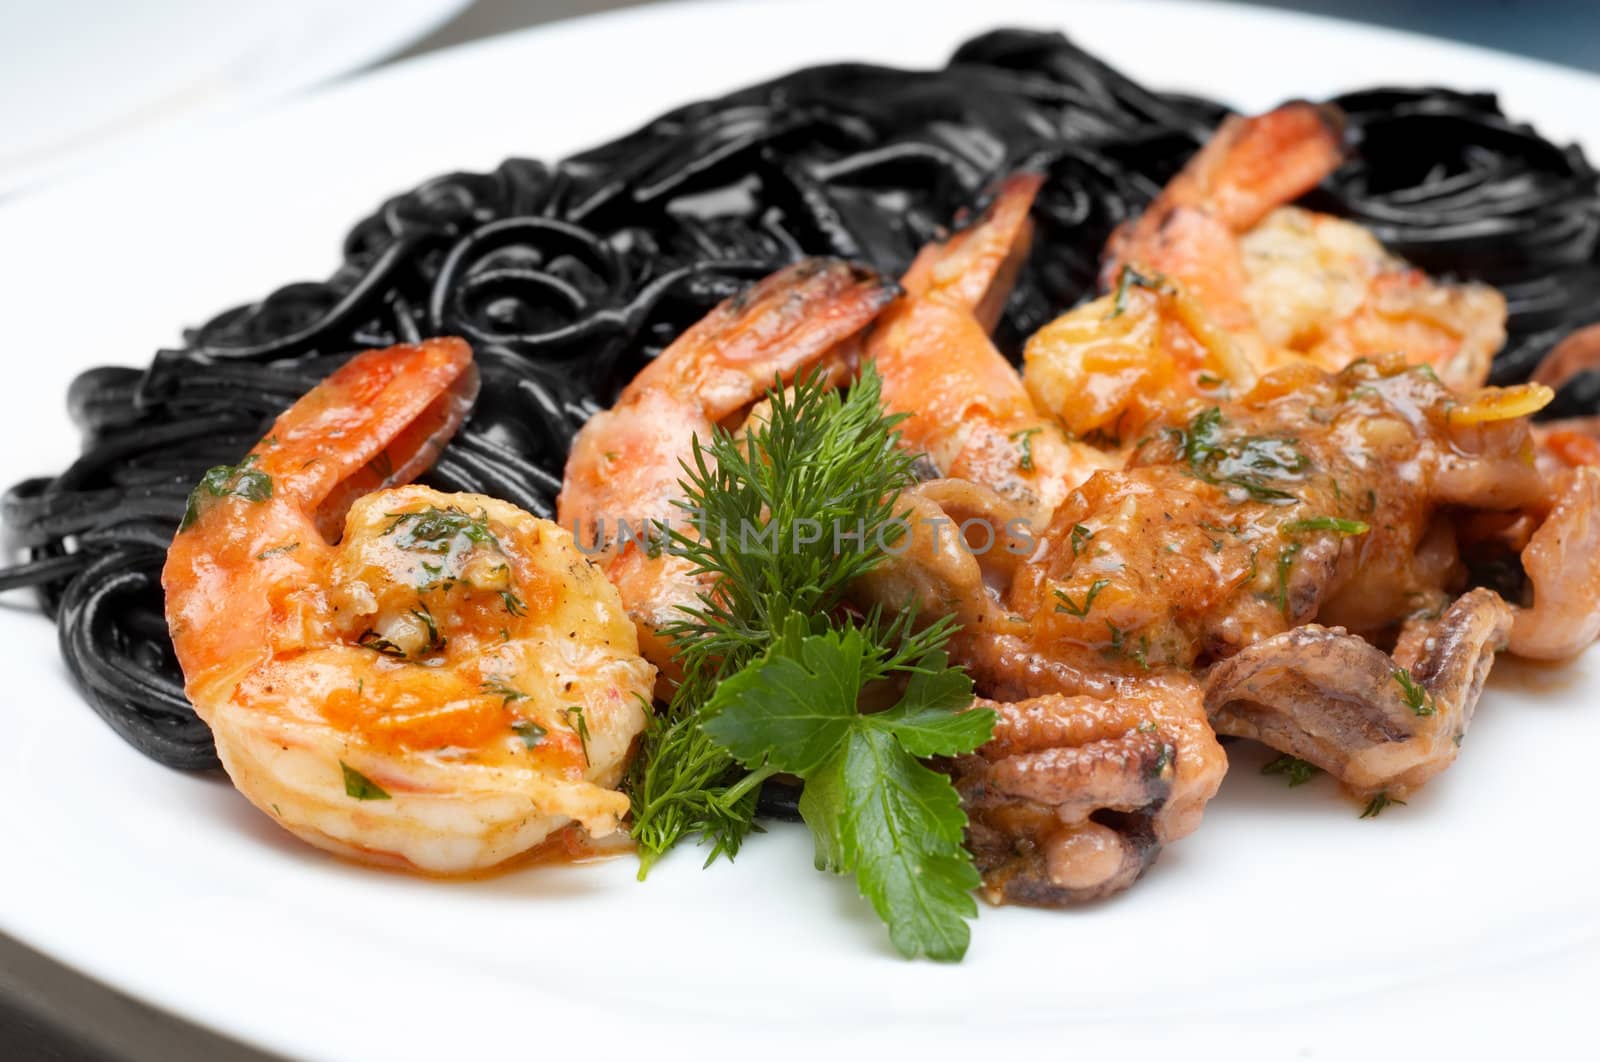 black spaghetti with shrimps by starush